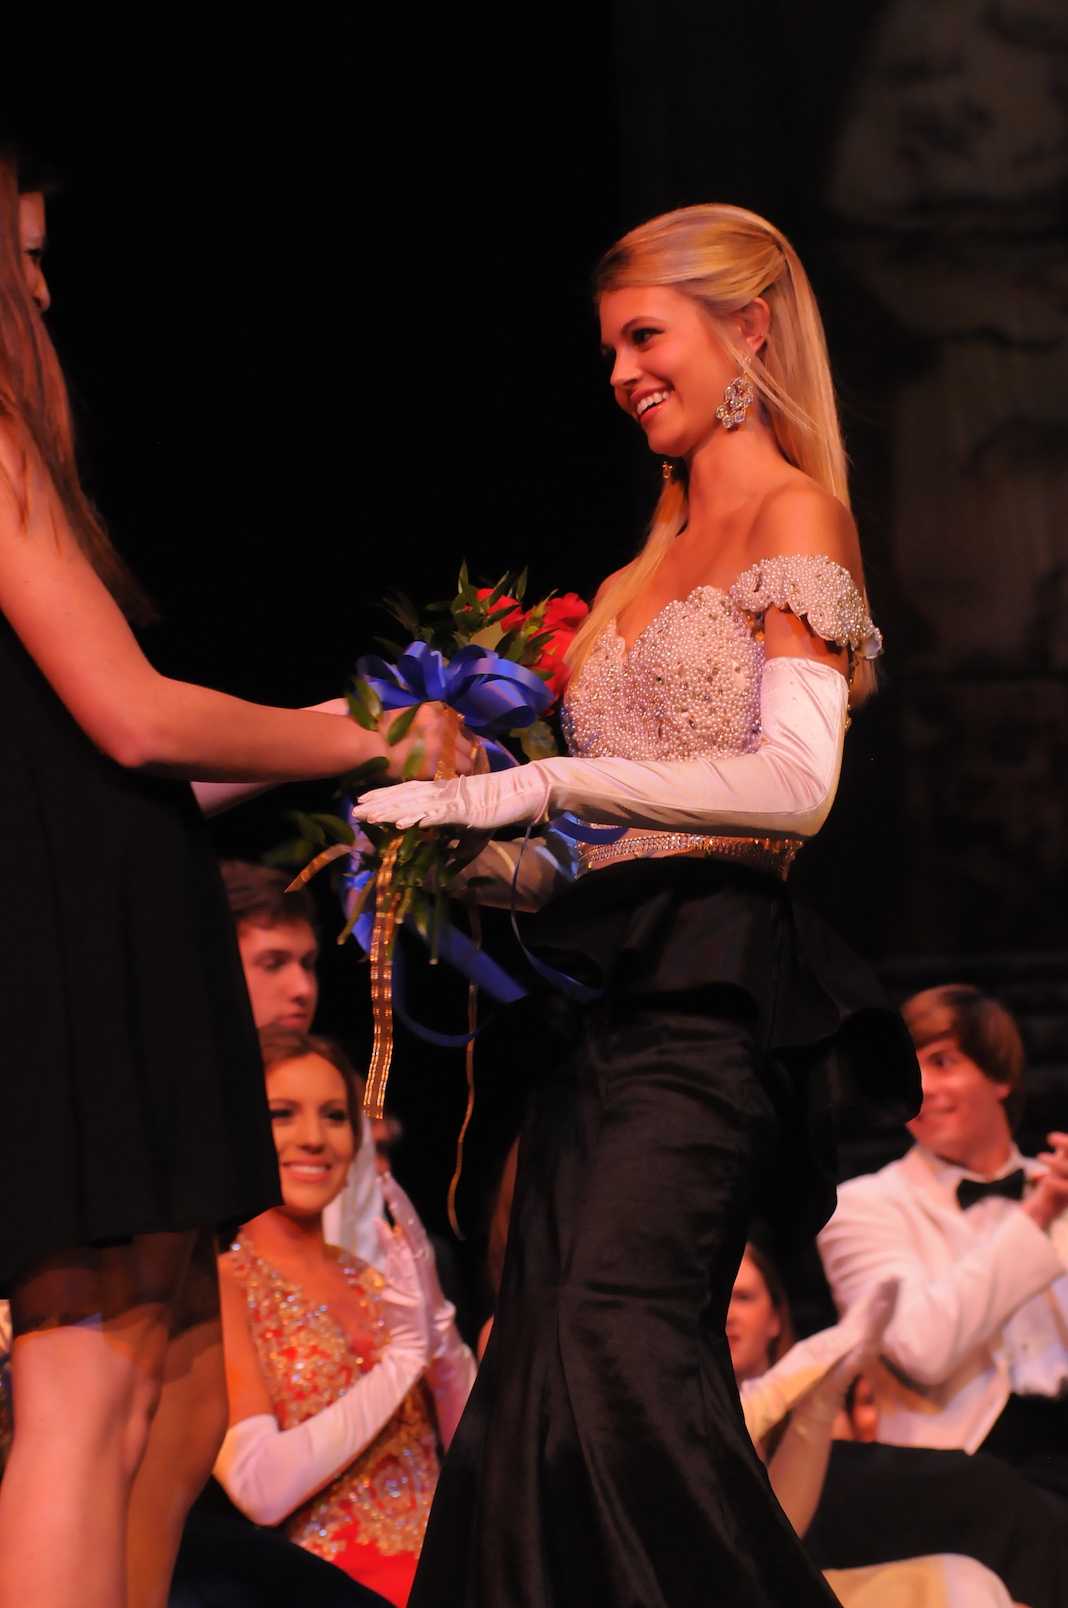 Mallory Abraham receiving award for most Beautiful. courtesy of Hubert Worley Photography.